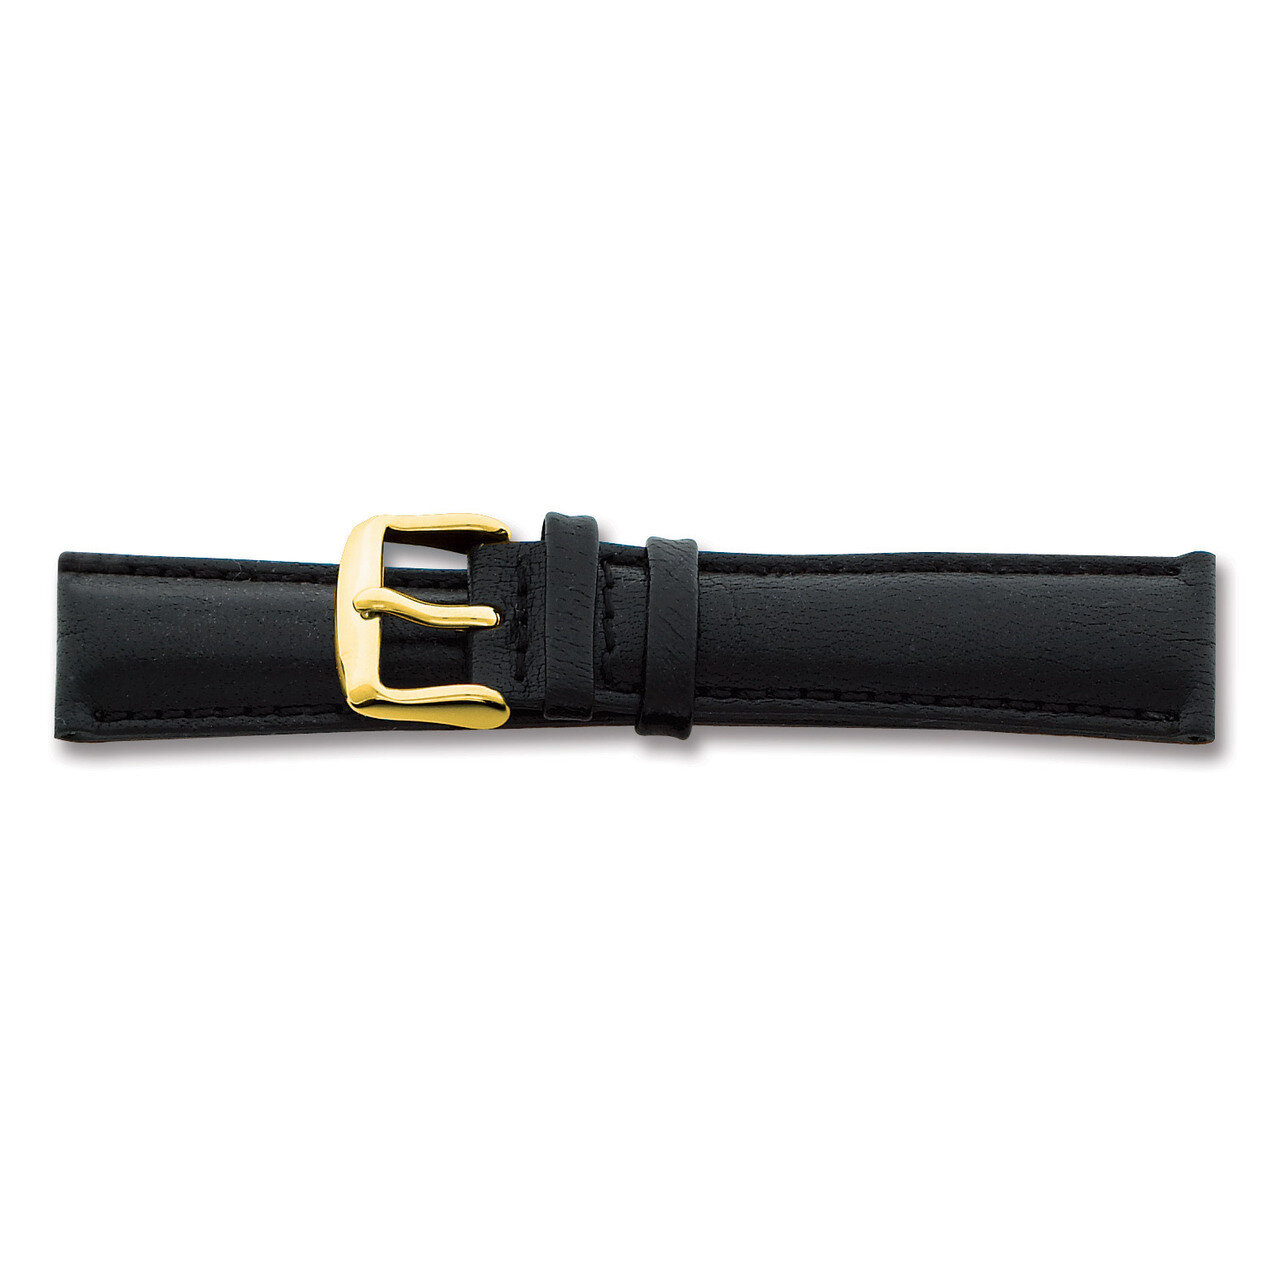 20mm Black Smooth Leather Chrono Buckle Watch Band 7.5 Inch Gold-tone BAY141-20